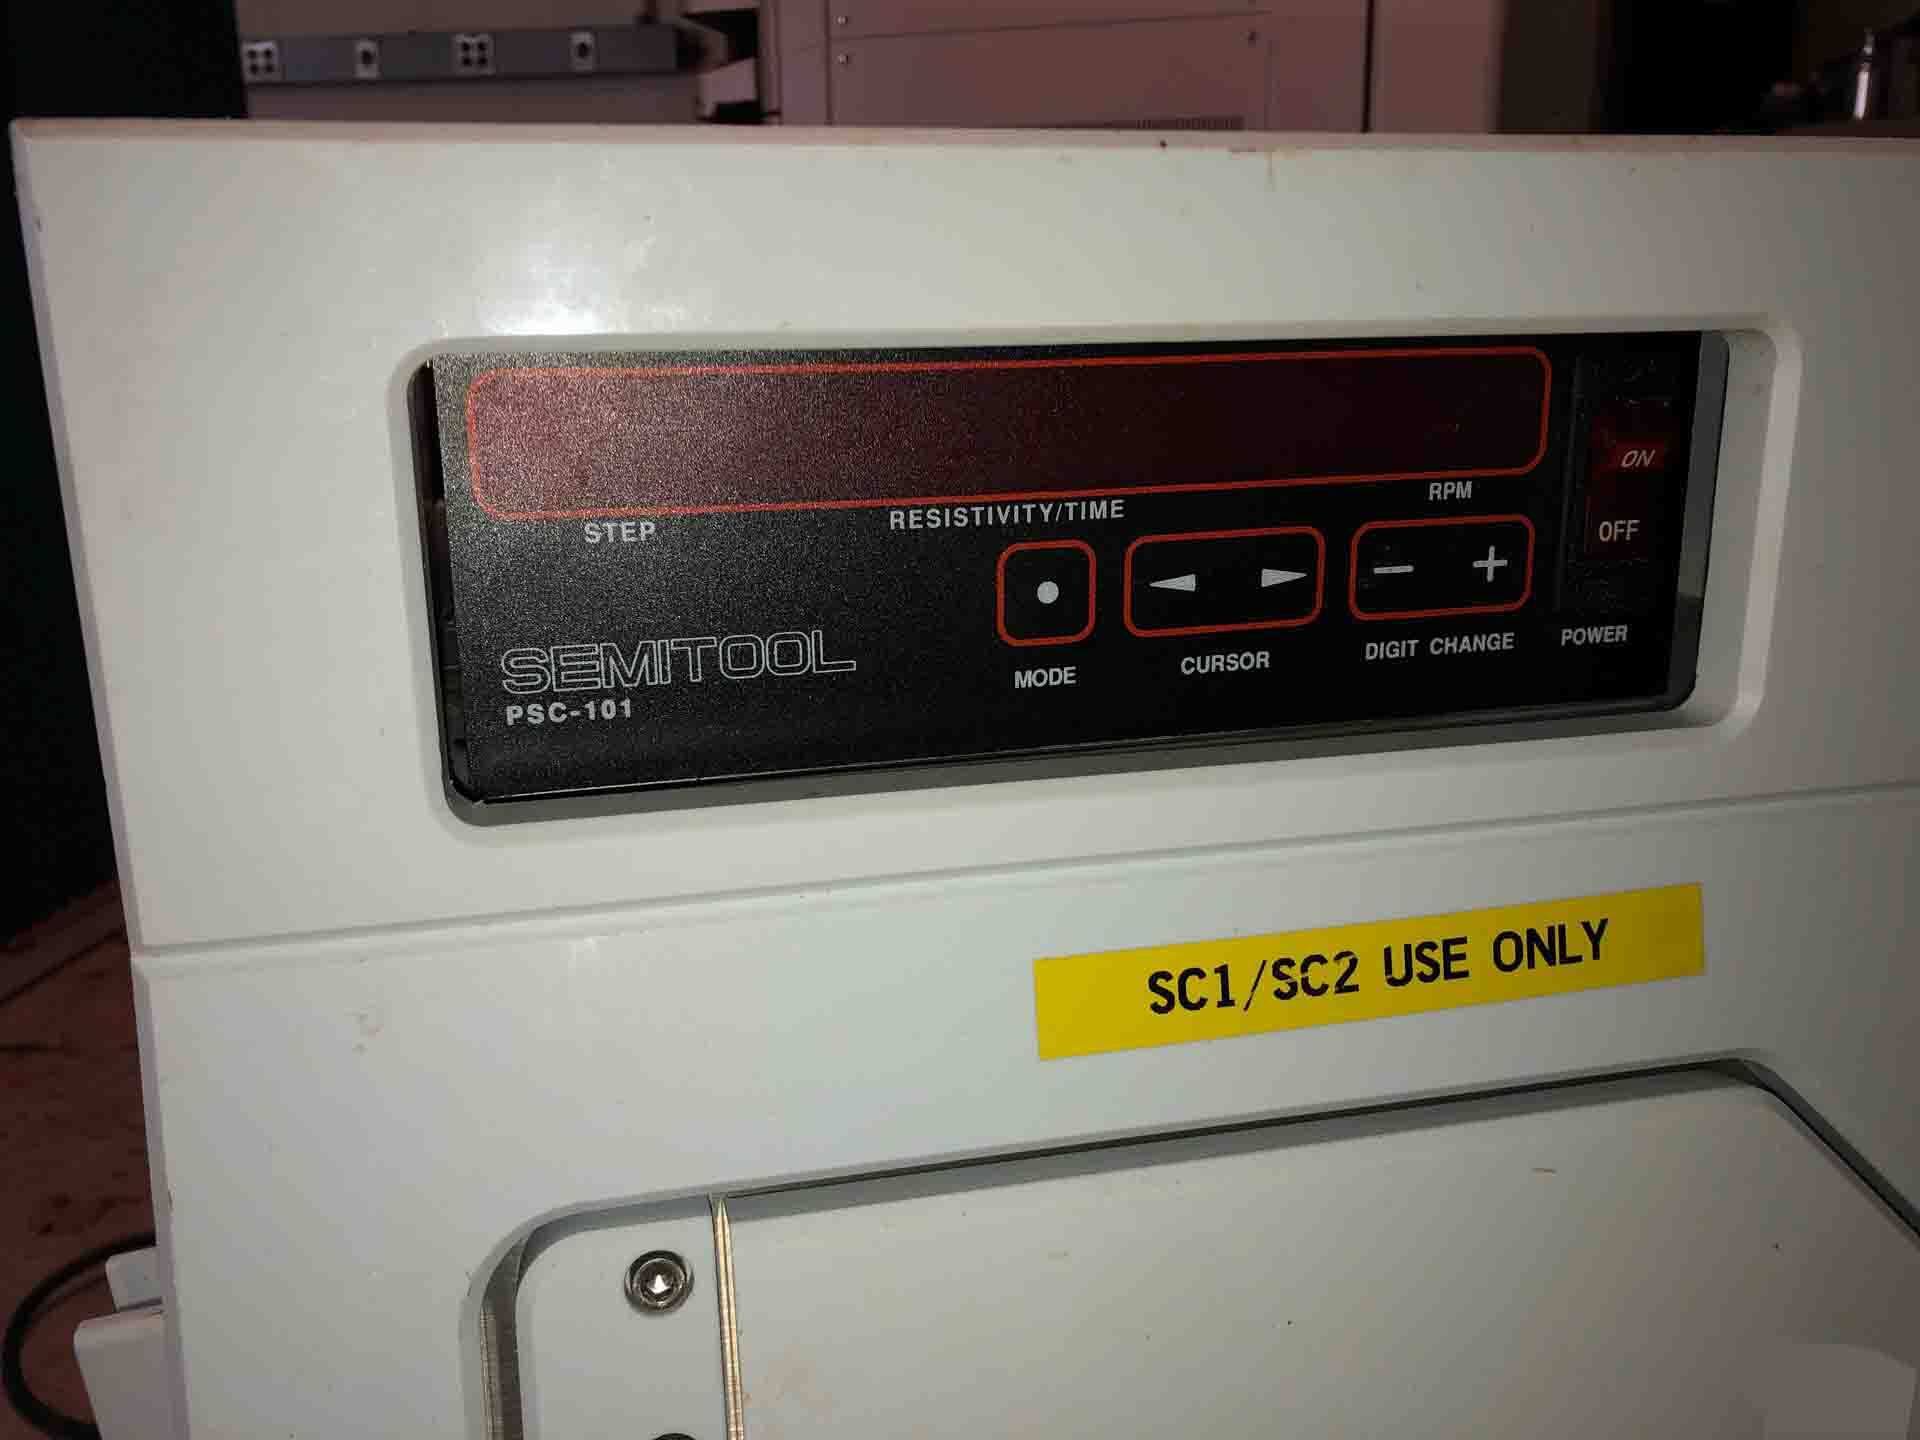 Photo Used SEMITOOL PSC-101 For Sale